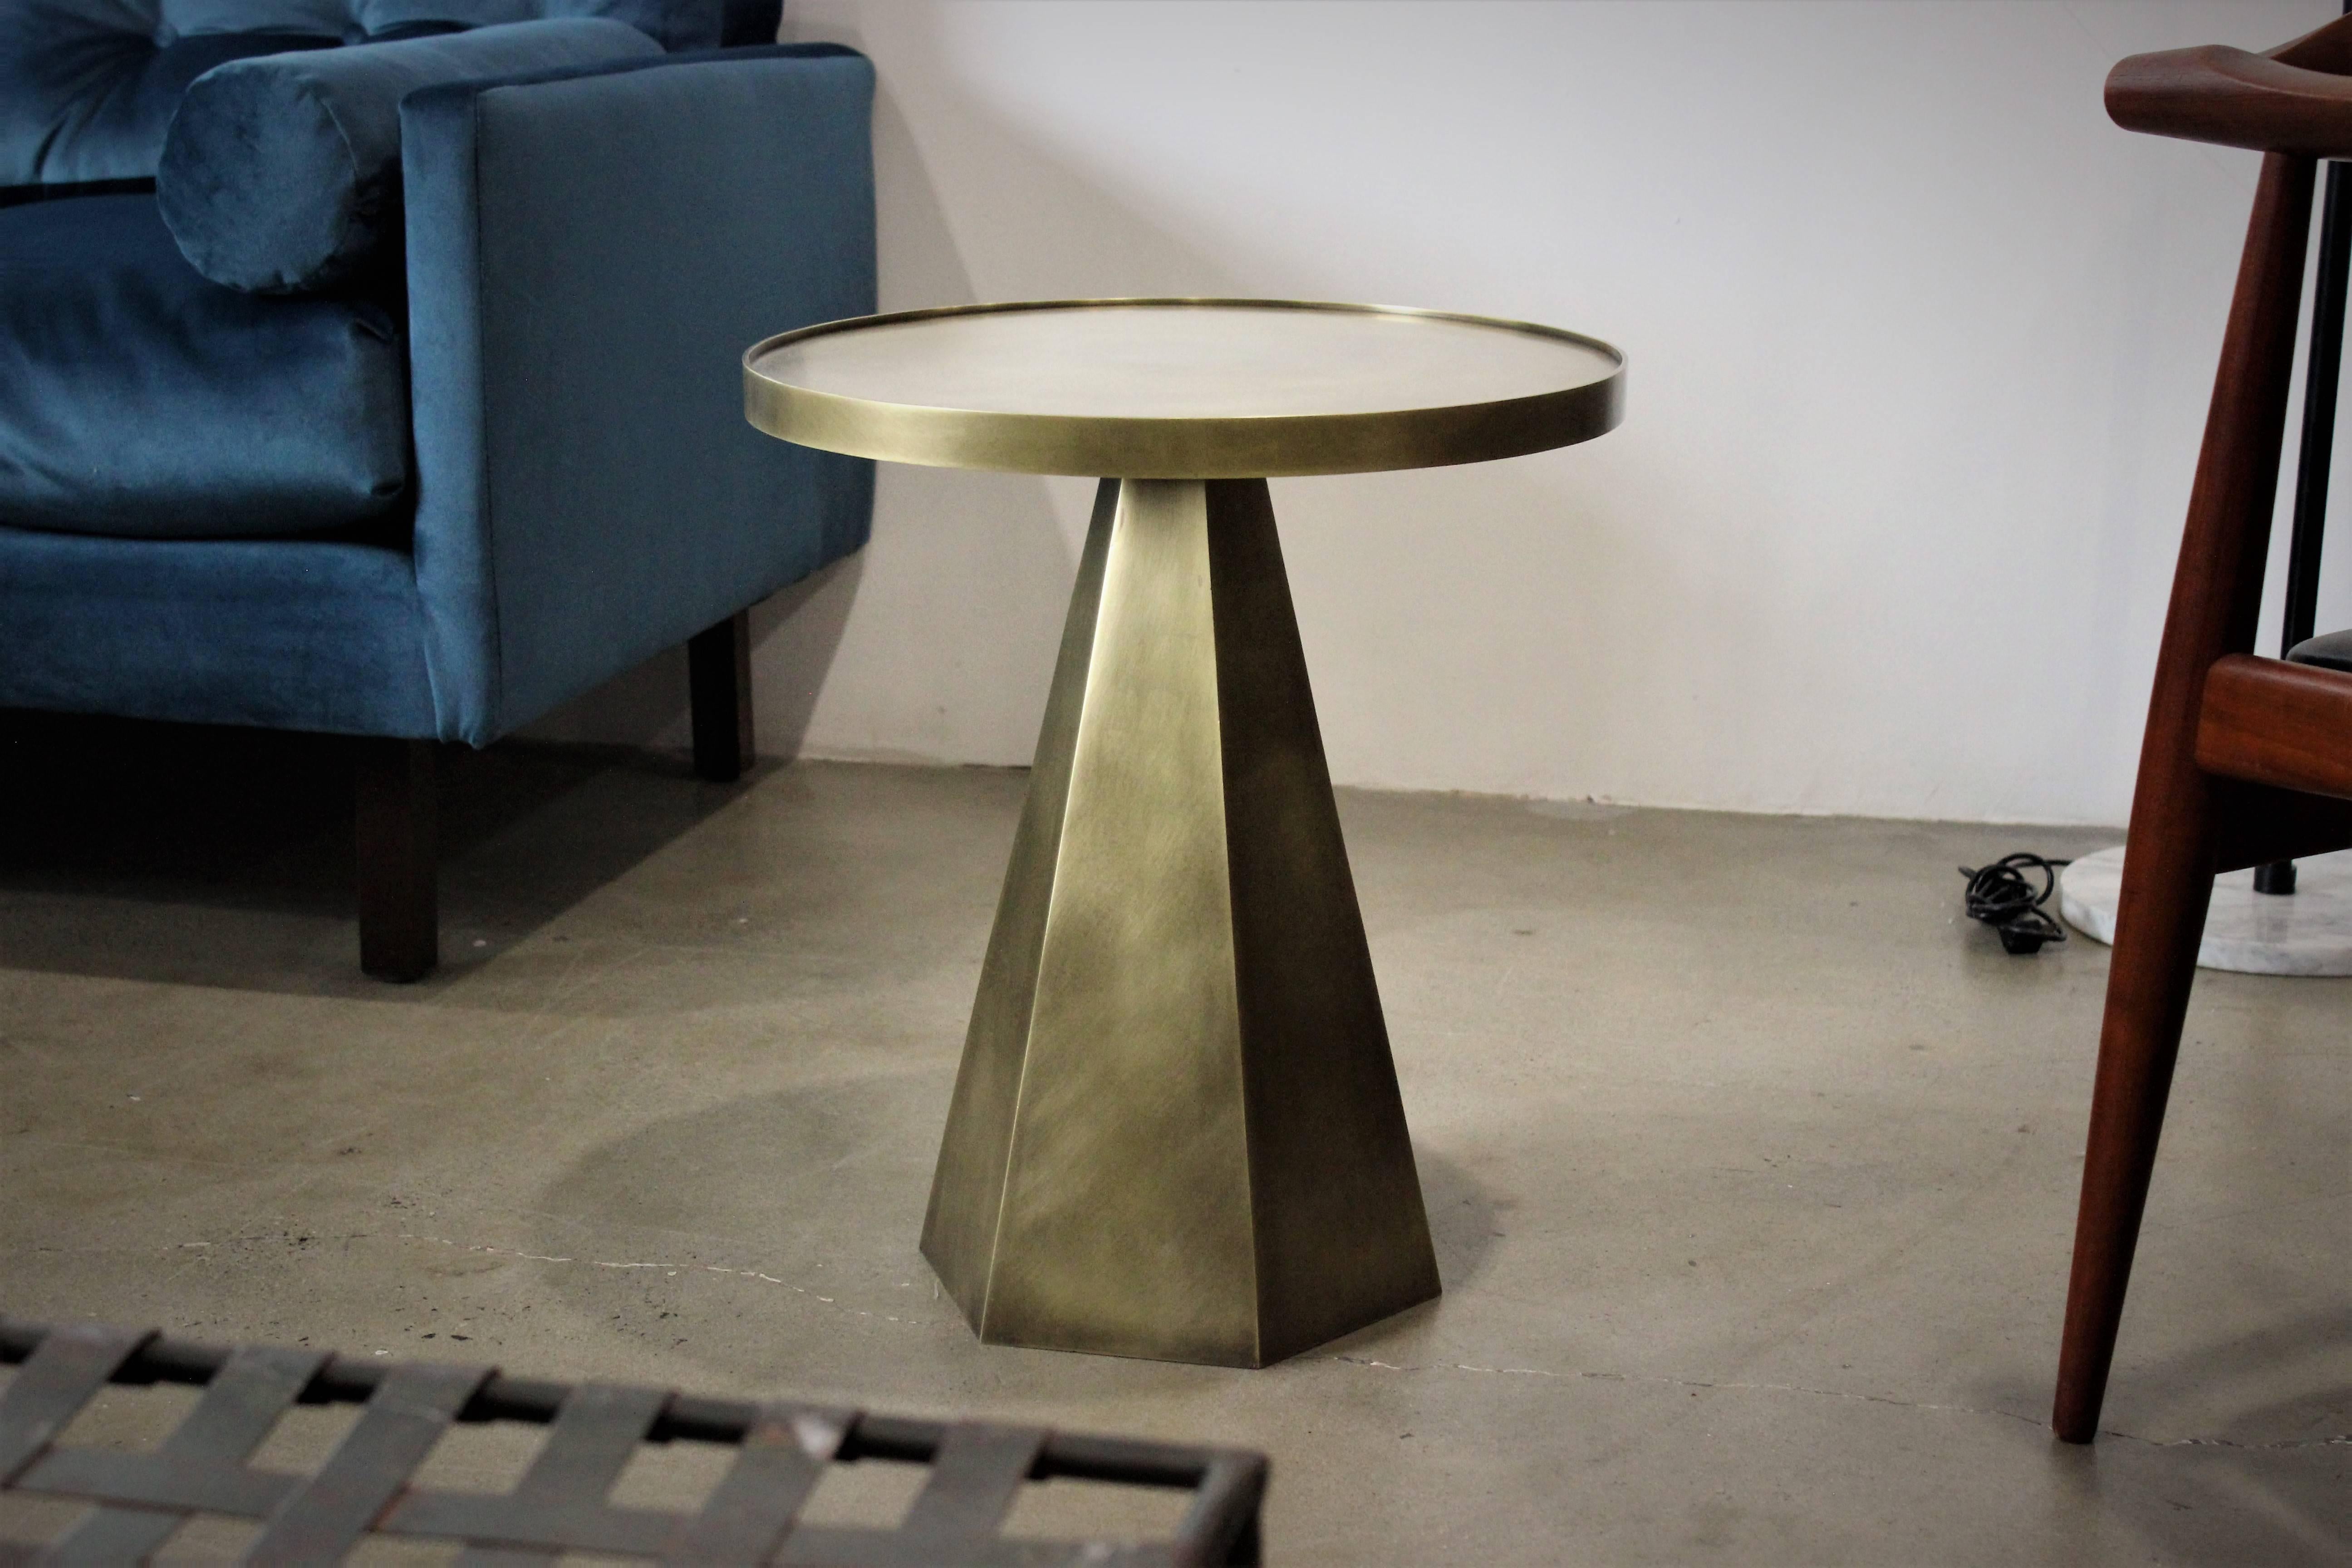 Architectural hexagonal side table in solid patinated brass. Handsome Brutalist, geometric design. This table is meticulously handcrafted in solid brass plate. The tapered base forged from six plates, each side brazed and ground to a crisp, clean